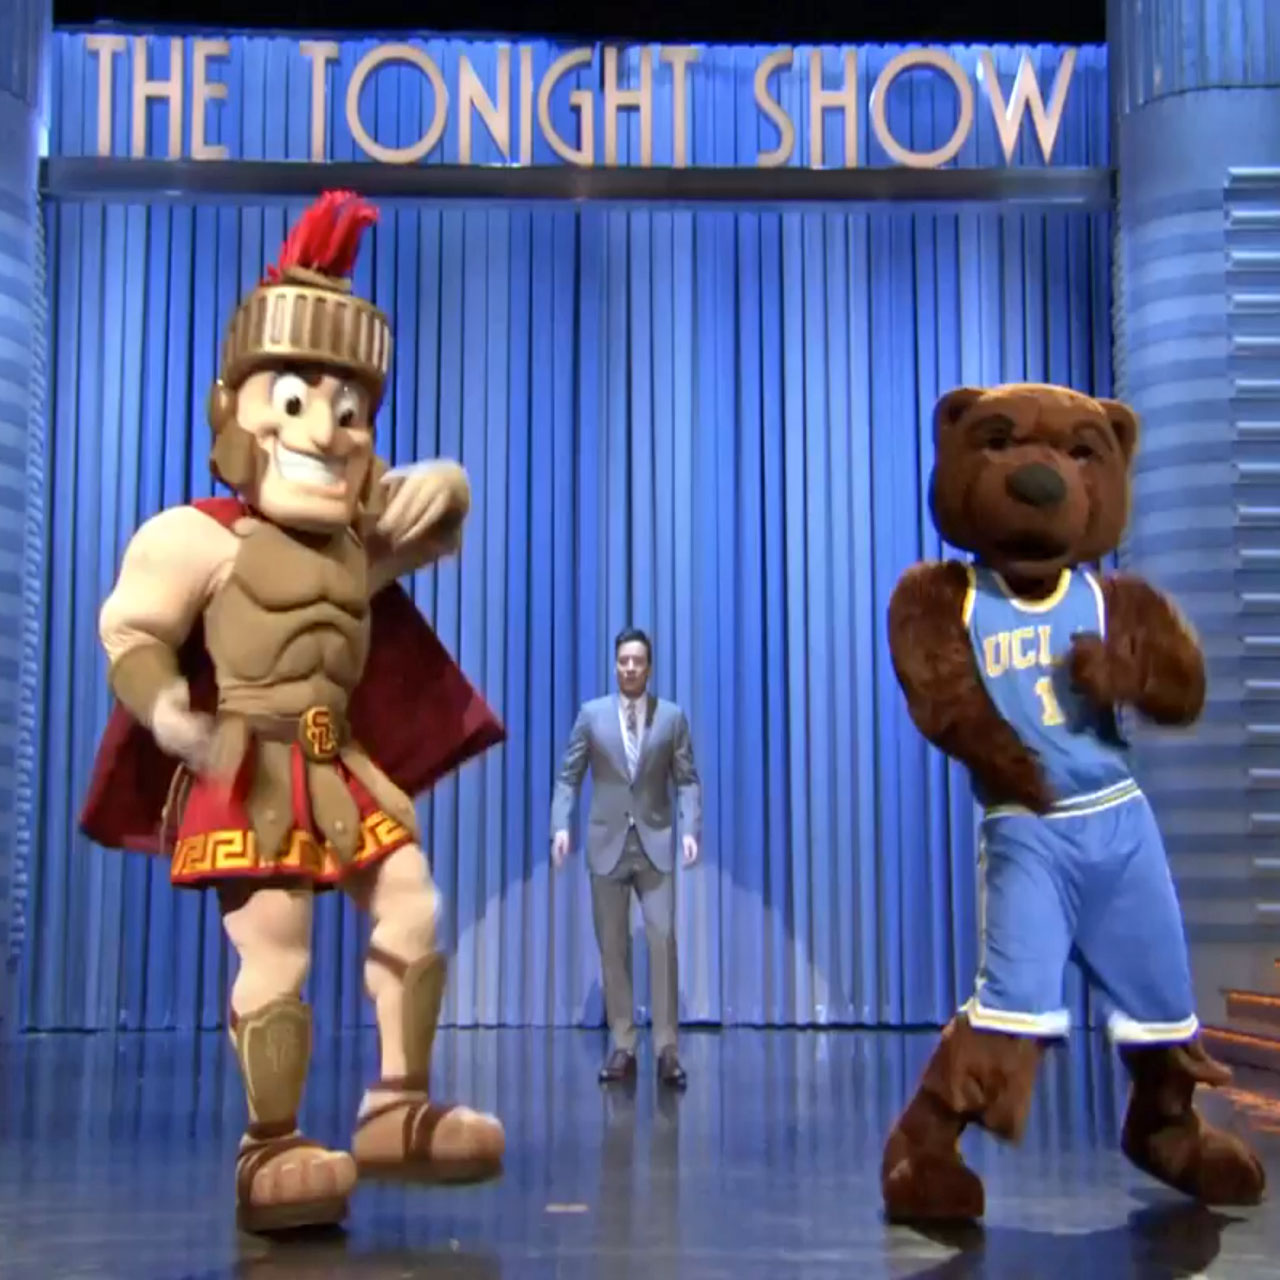 Tonight Show mascot dance-off features Tommy Trojan, Joe Bruin, and Hashtag the Panda